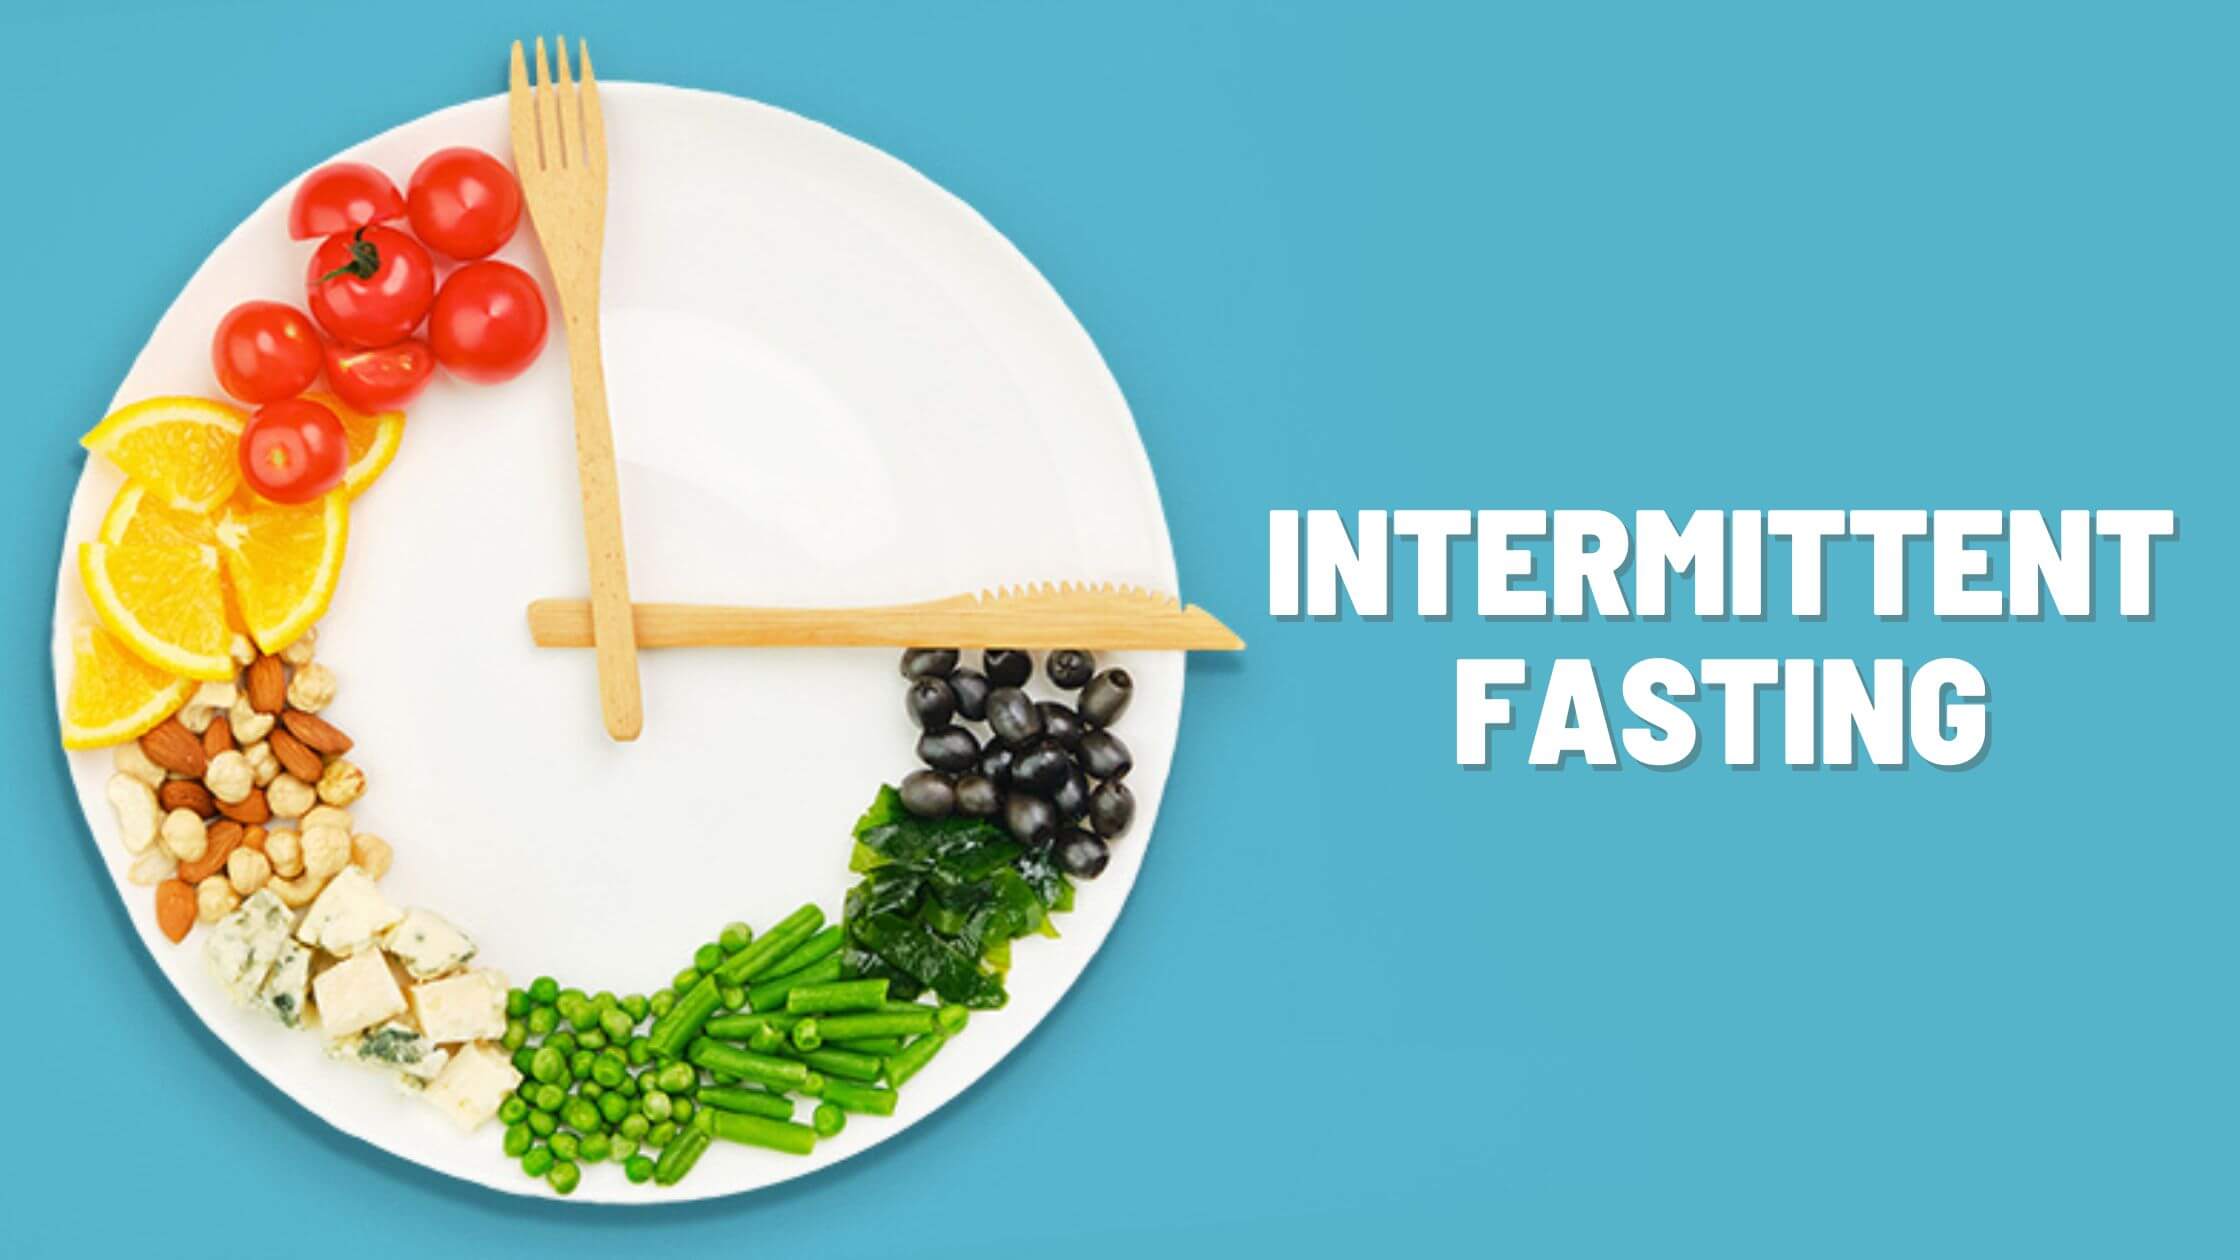 How To Succeed With Intermittent Fasting